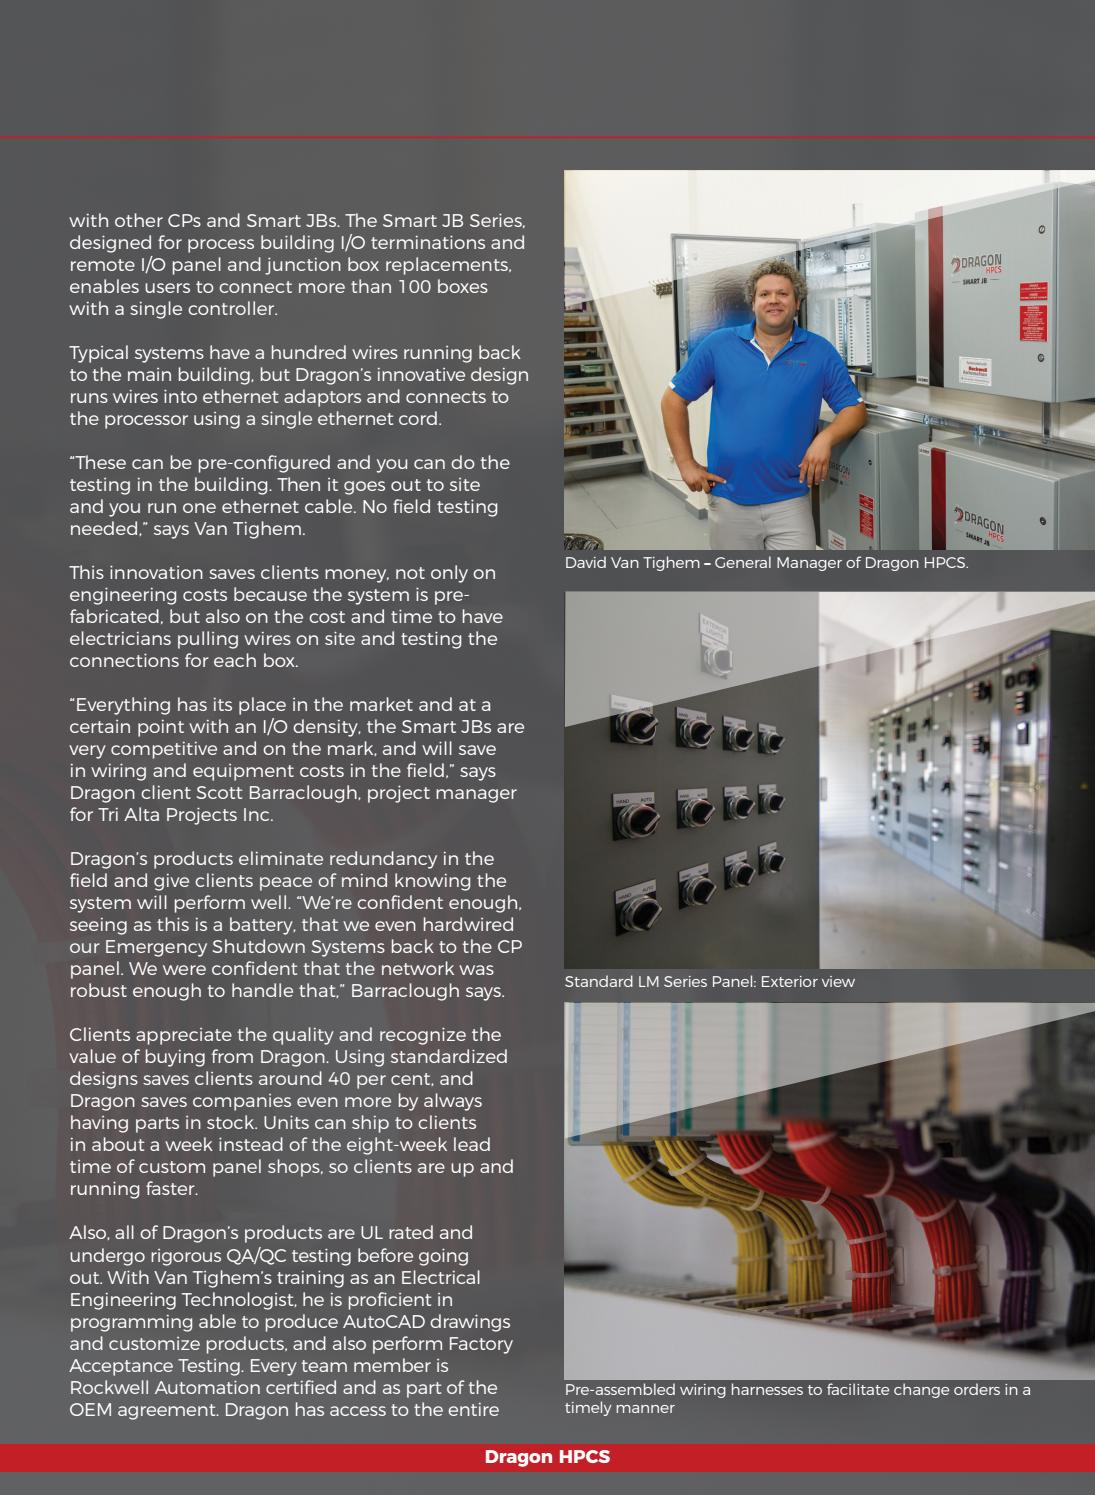 Business in Calgary Magazine - Business Profile for Dragon HPCS